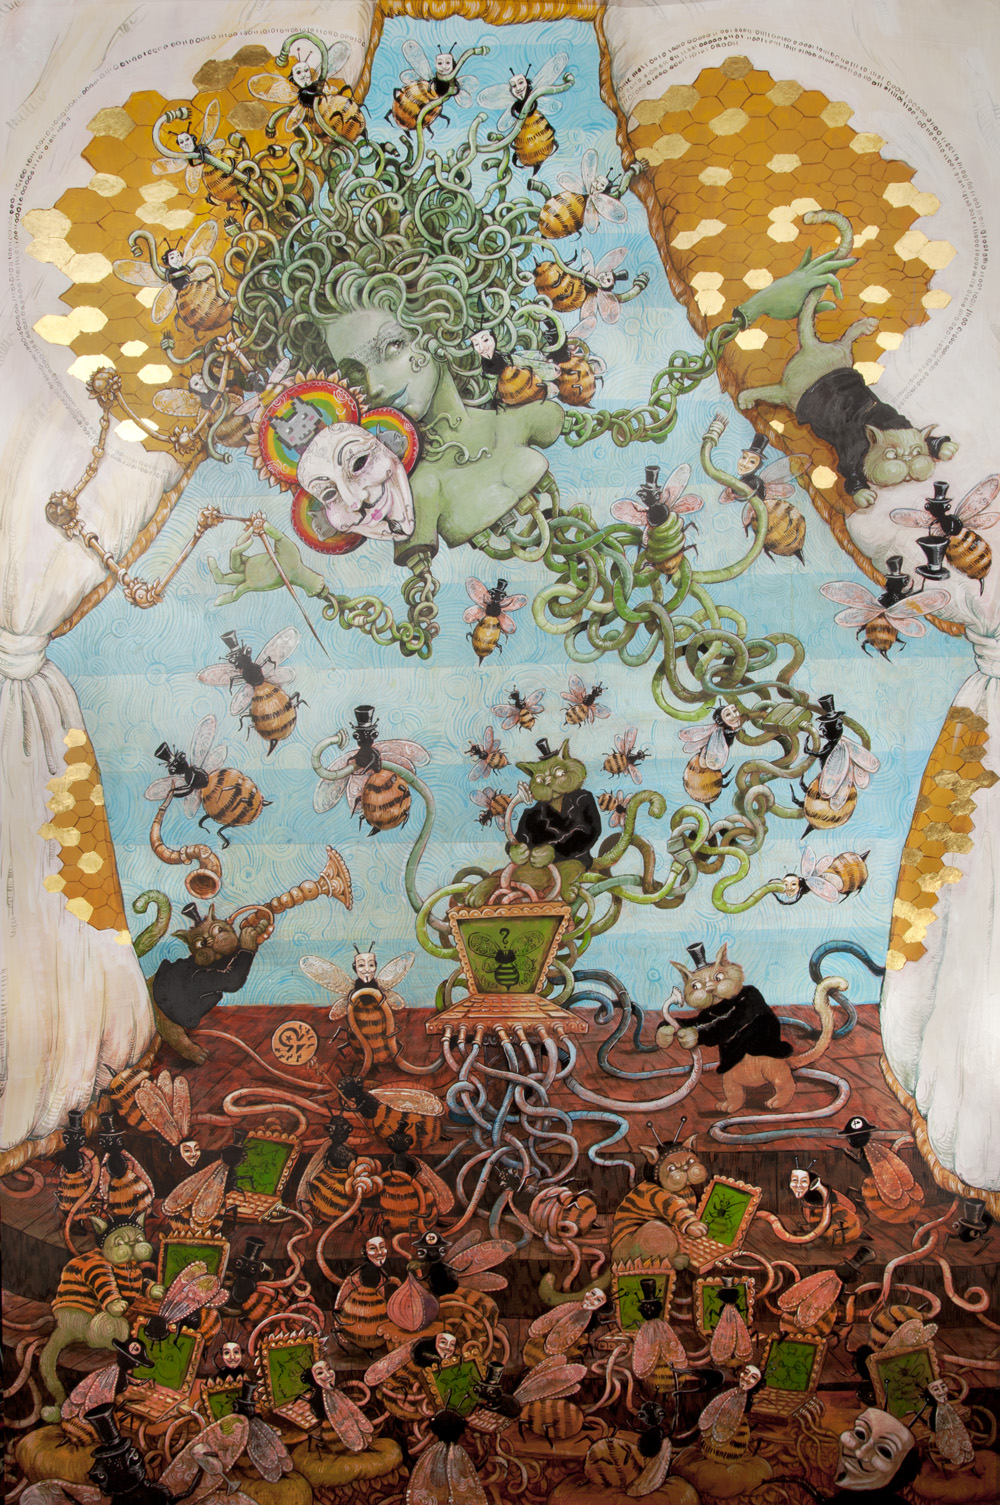 Molly Crabapple. The Shell Game